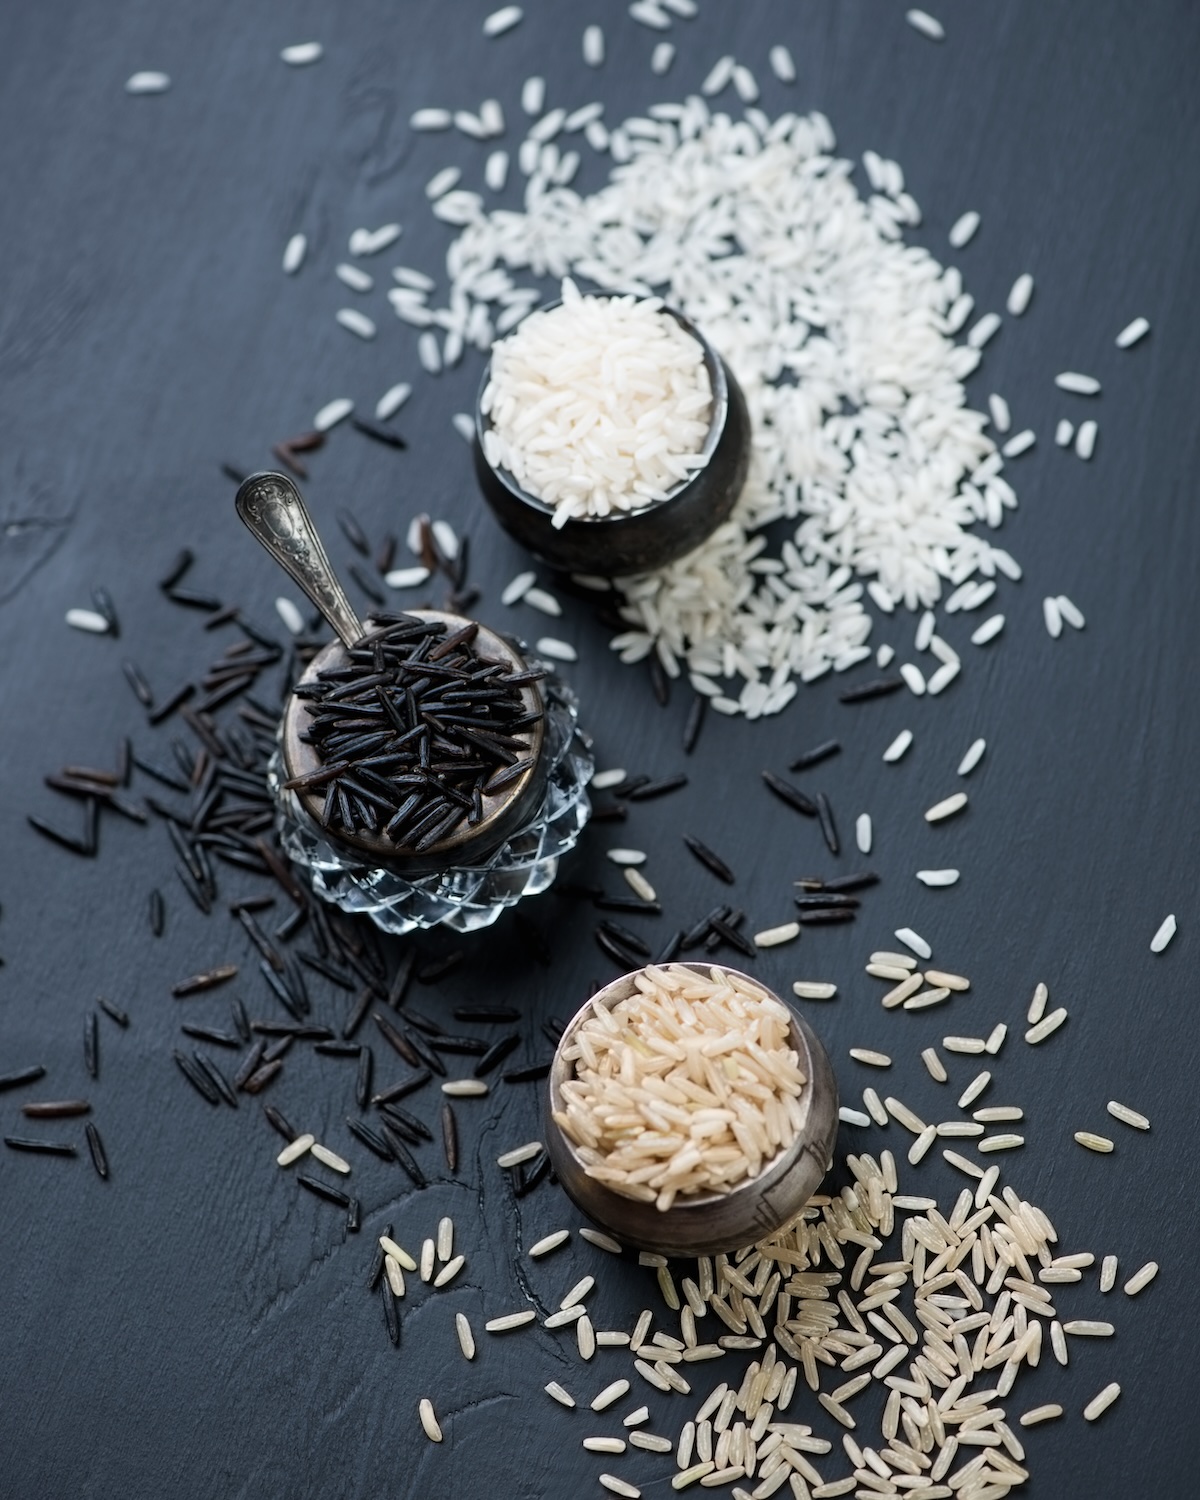 Variety of raw rice, black wooden background, view from above